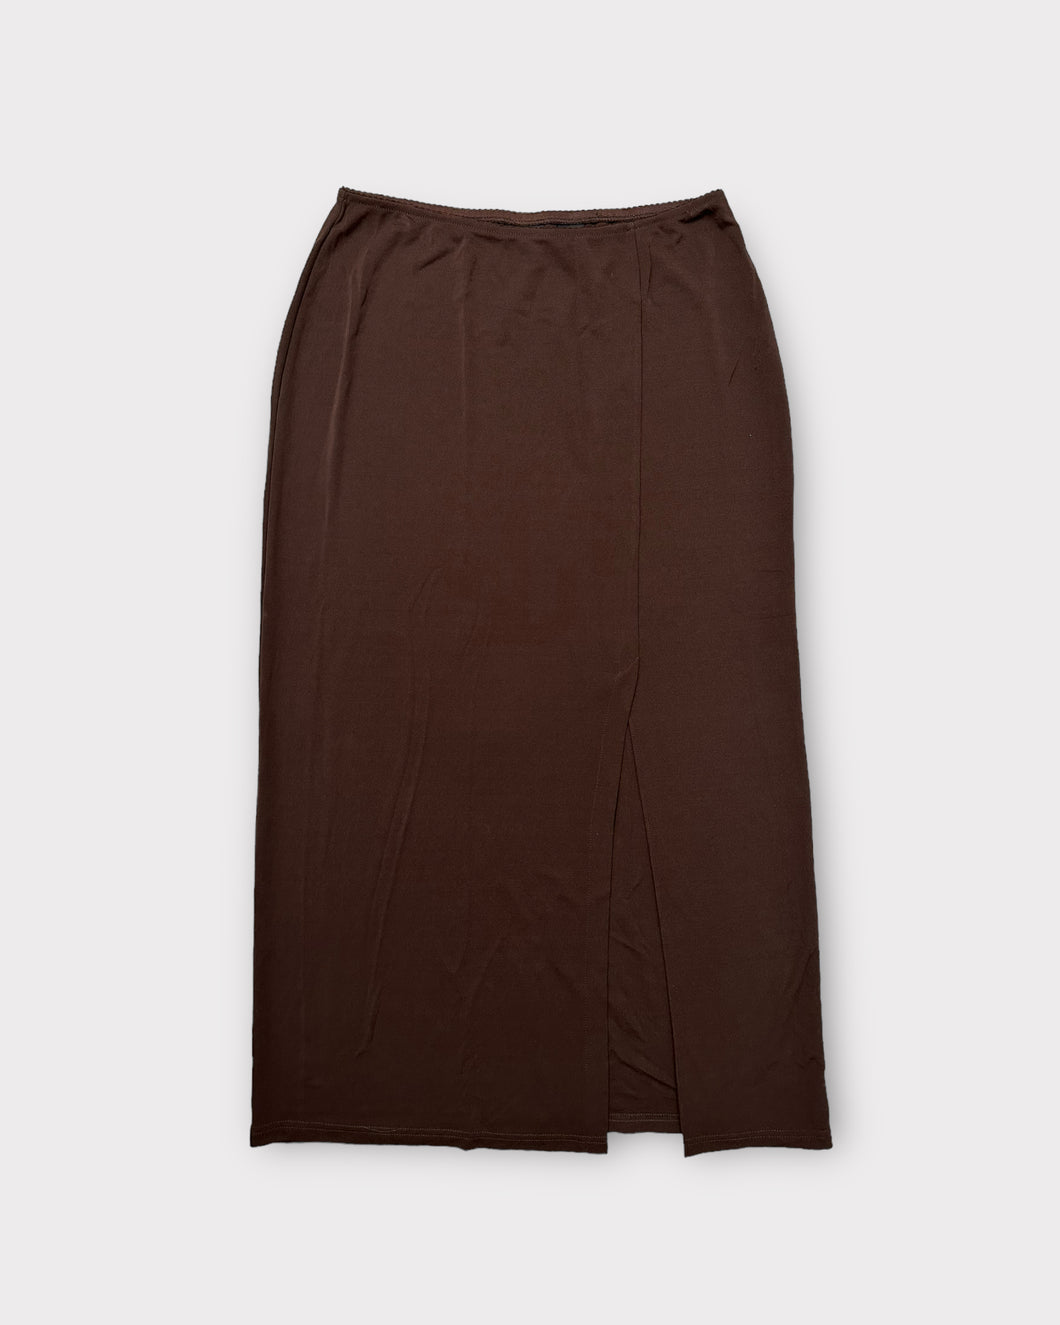 NY&Co Chocolate Brown Maxi Skirt with Slit (L)